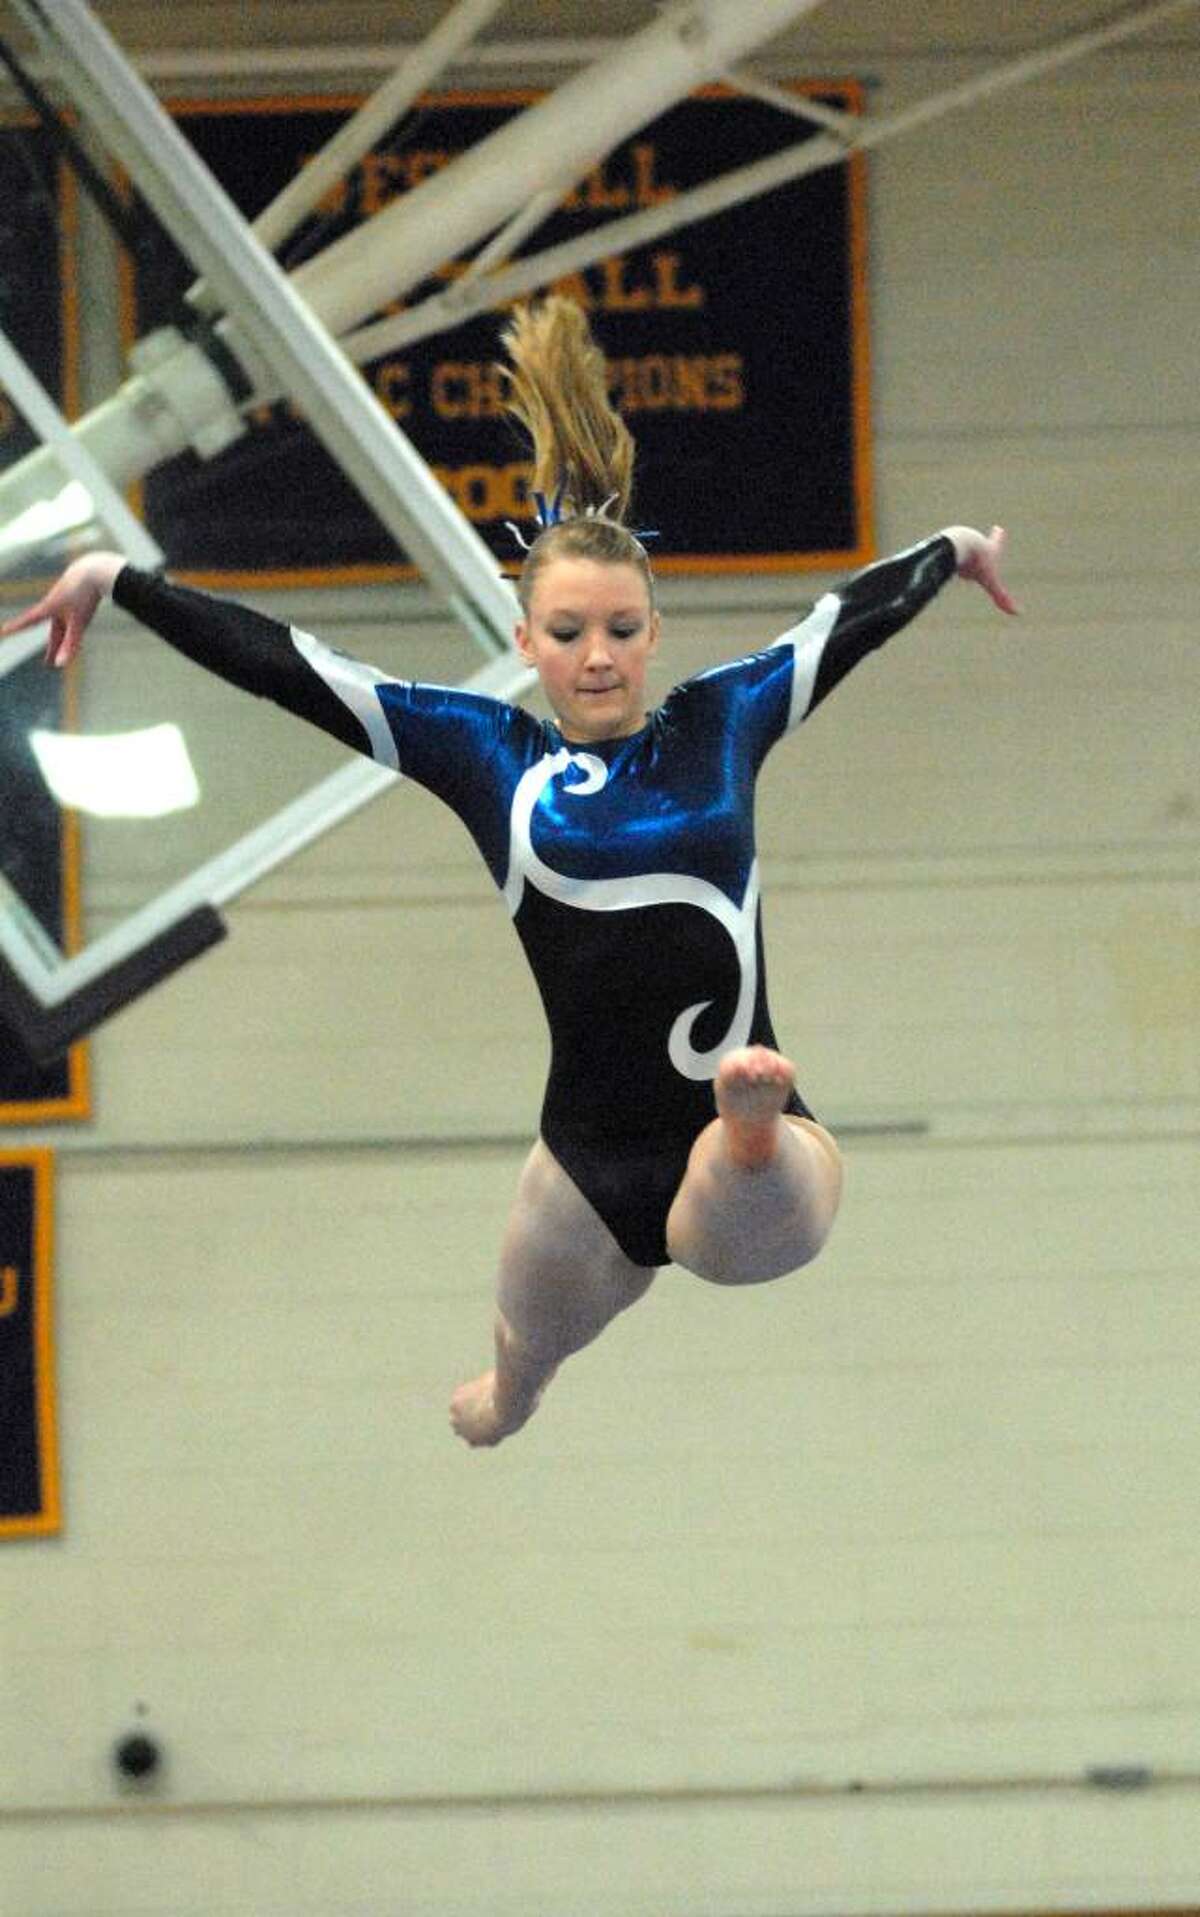 Charlotte Morgan from Darien High School competes at the FCIAC Gymnastics Championships at Westhill High School on Friday February 12, 2010.